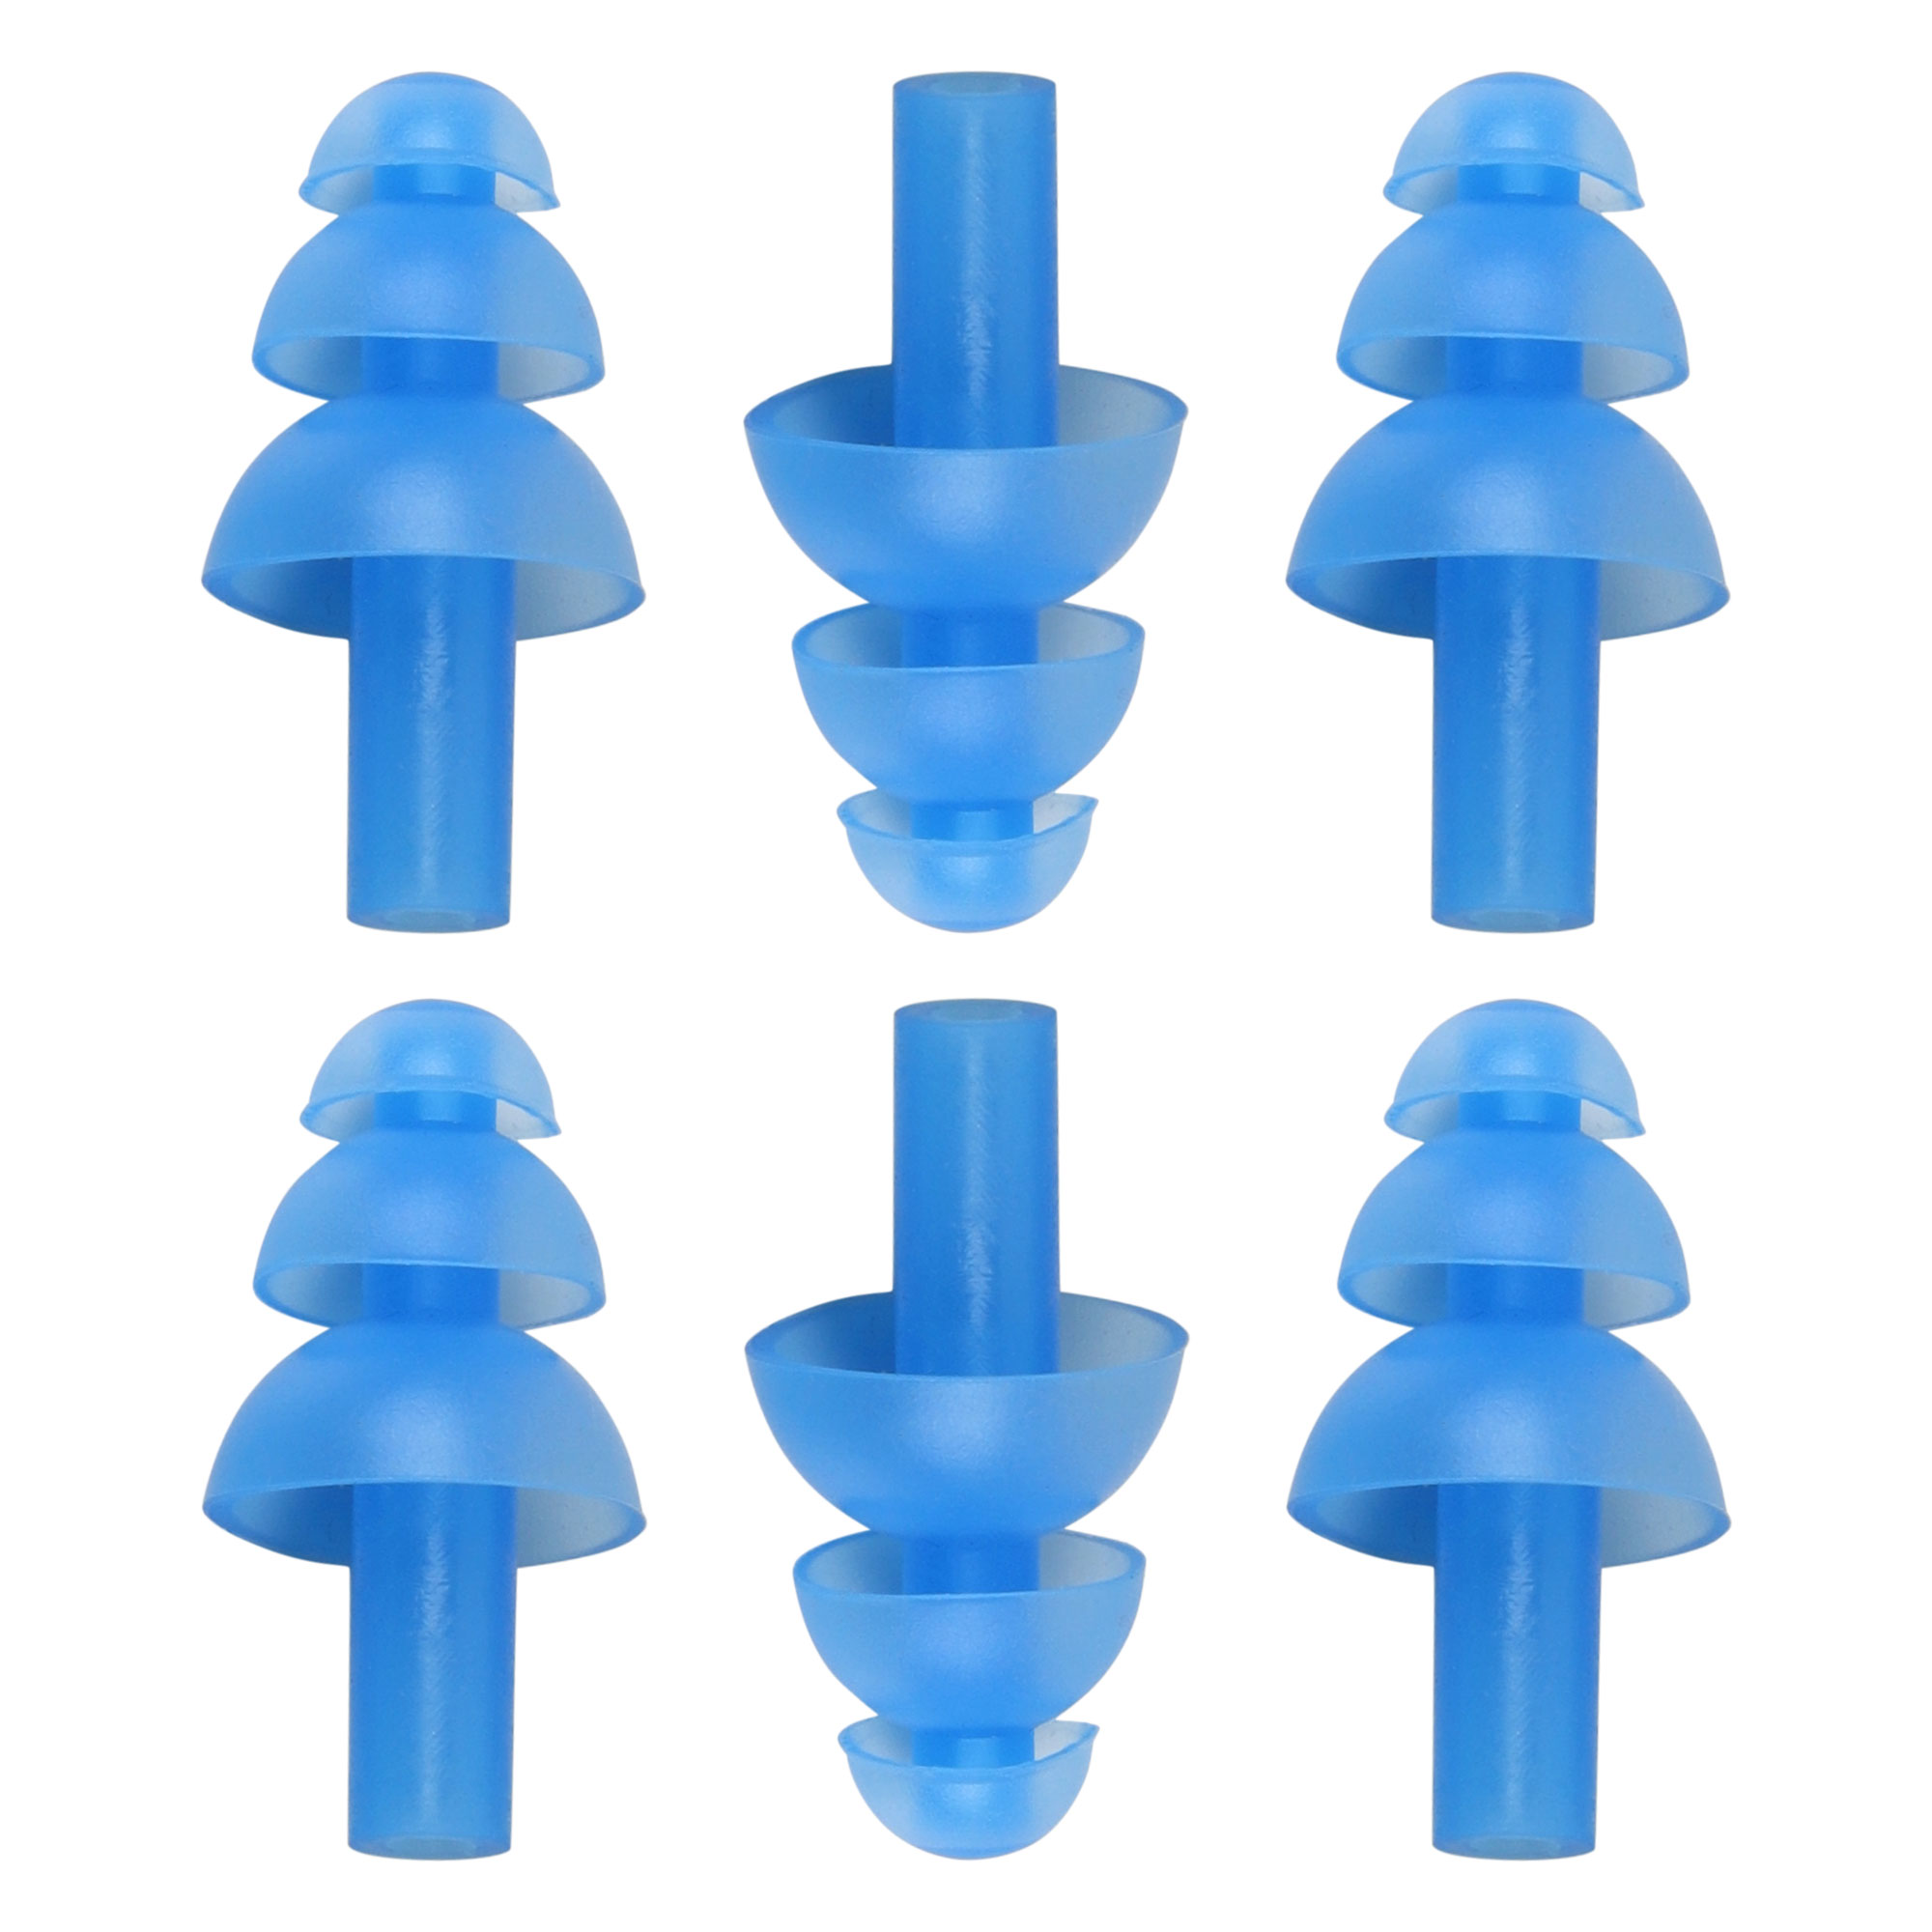 Unique Bargains 3 Pairs Soft Silicone Swimming Ear Plug Waterproof Earplug Protector Blue